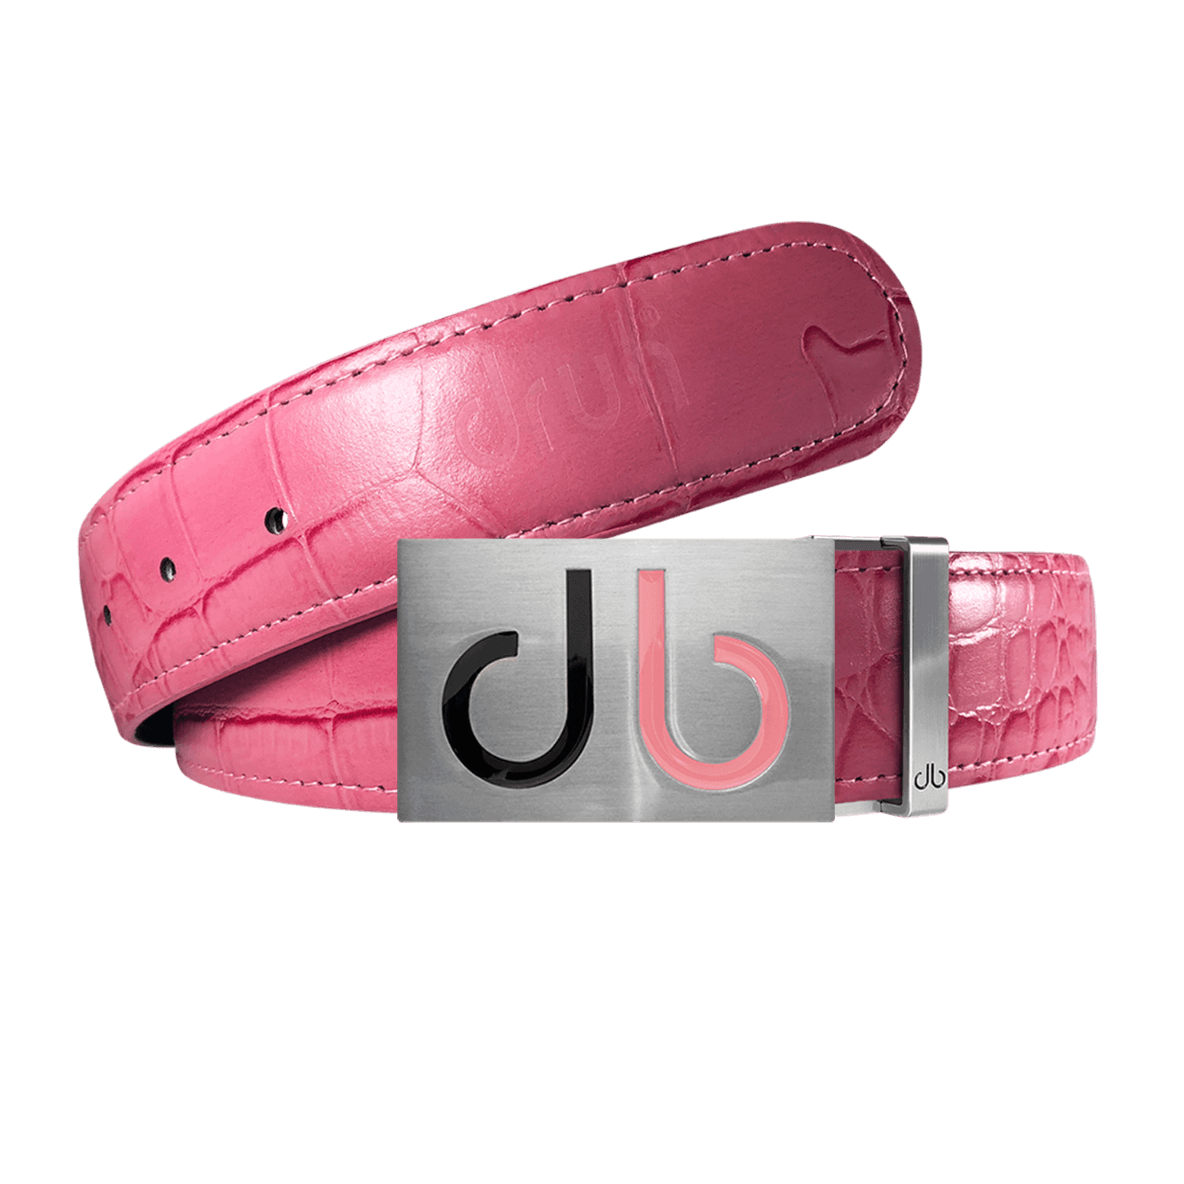 Pink Crocodile leather strap with Two-tone black and pink buckle